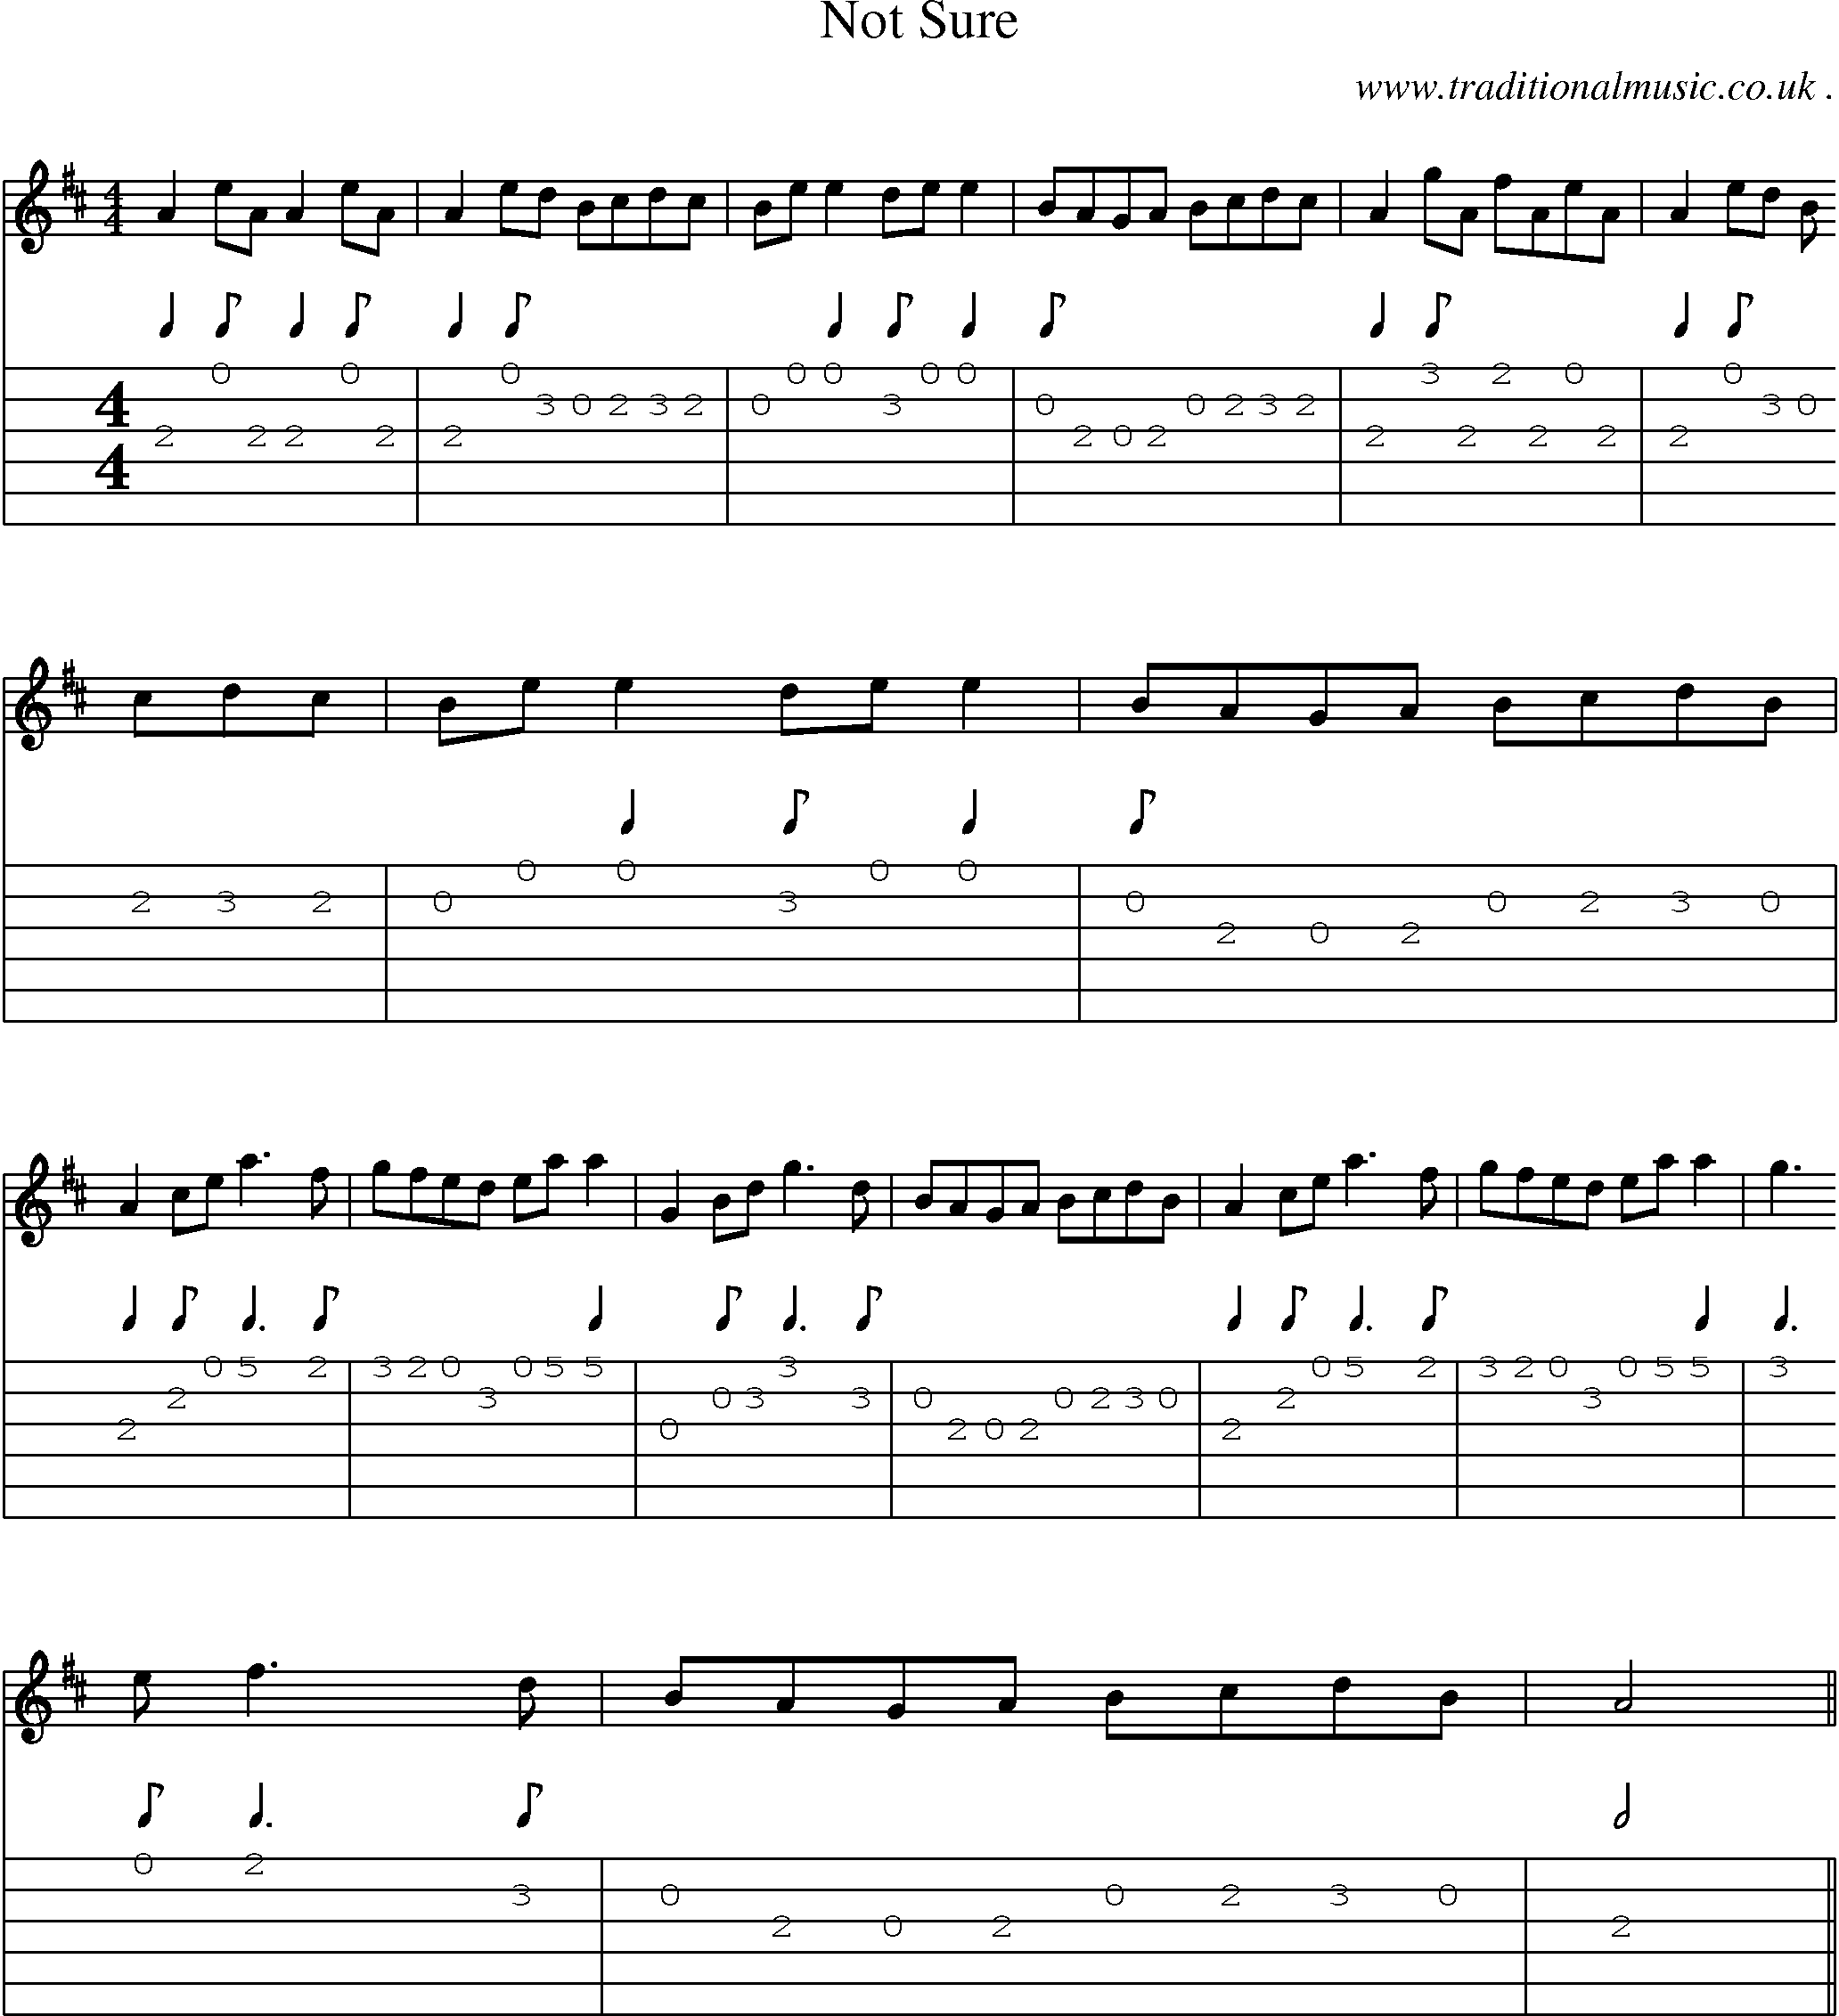 Sheet-Music and Guitar Tabs for Not Sure